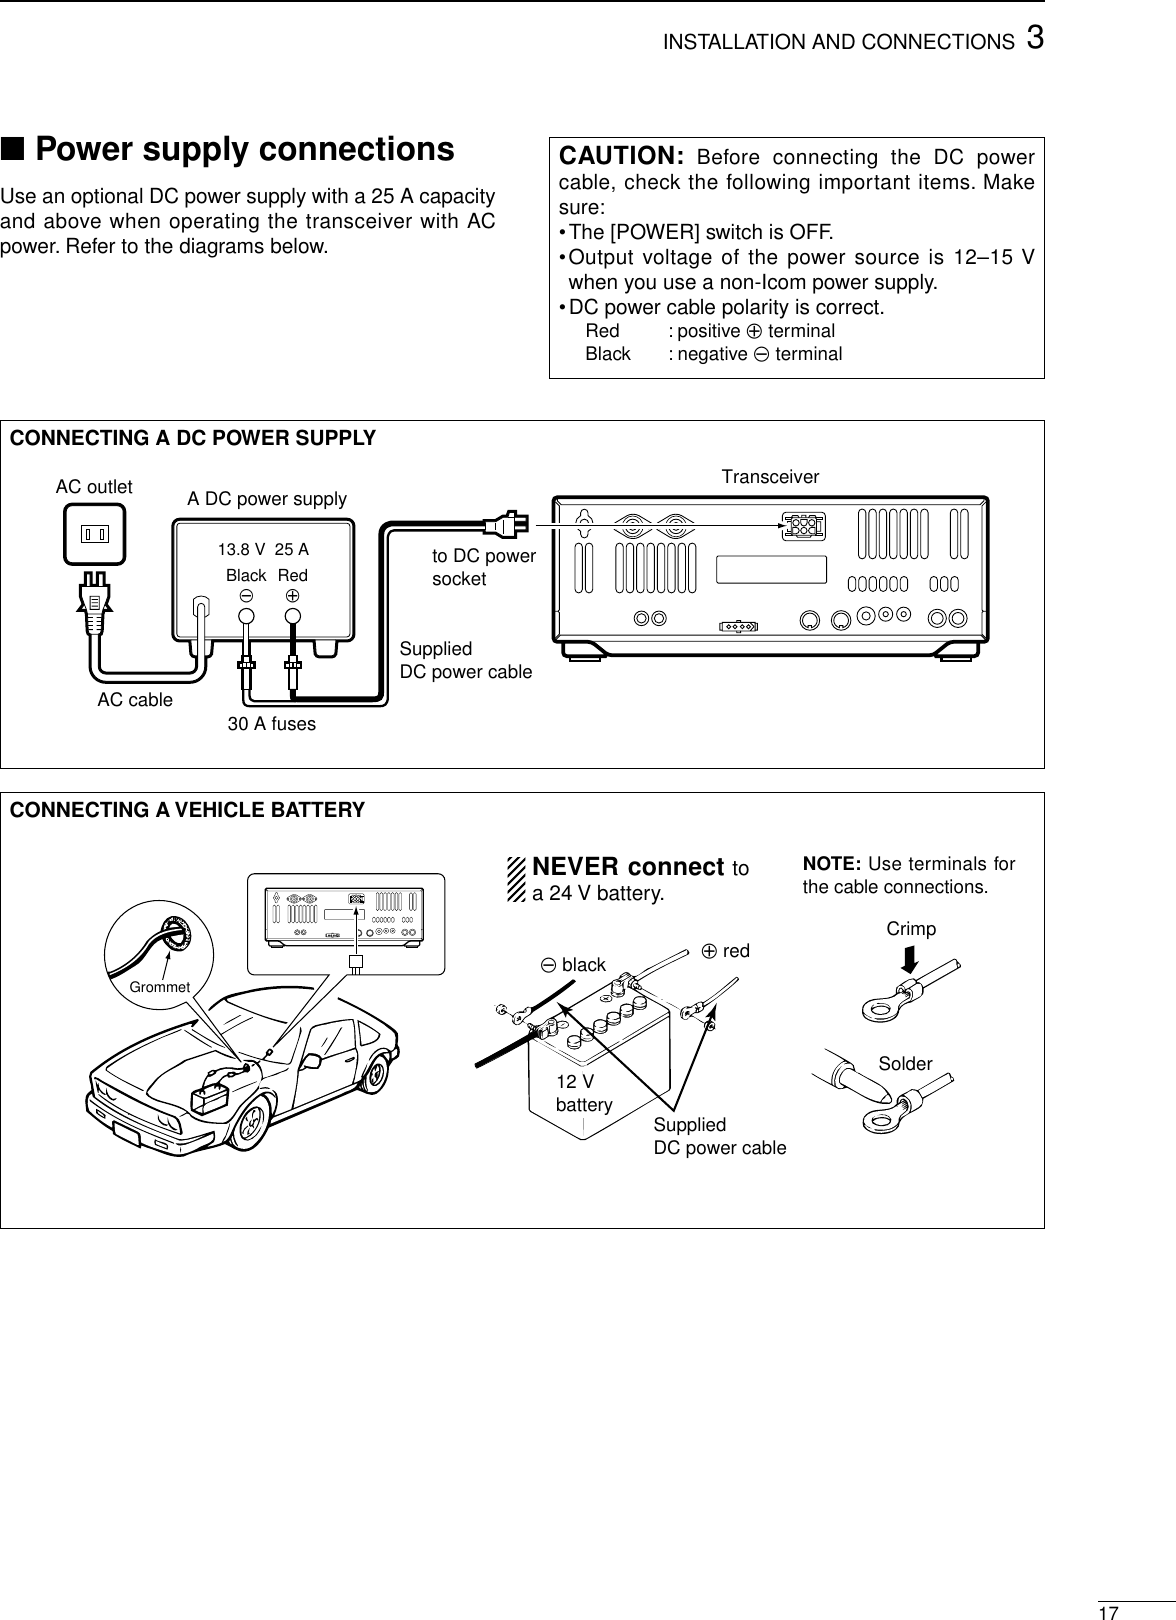 173INSTALLATION AND CONNECTIONS■Power supply connectionsUse an optional DC power supply with a 25 A capacityand above when operating the transceiver with ACpower. Refer to the diagrams below.CAUTION: Before connecting the DC powercable, check the following important items. Makesure:•The [POWER] switch is OFF.•Output voltage of the power source is 12–15 Vwhen you use a non-Icom power supply.•DC power cable polarity is correct.Red : positive +terminalBlack : negative _terminalCONNECTING A DC POWER SUPPLYto DC power socketA DC power supplyAC outletAC cable30 A fusesSuppliedDC power cable13.8 V  25 ABlack_Red+TransceiverCONNECTING A VEHICLE BATTERY12 Vbattery SuppliedDC power cable+ red_ blackCrimpSolderGrommetNEVER connect toa 24 V battery.NOTE: Use terminals forthe cable connections.